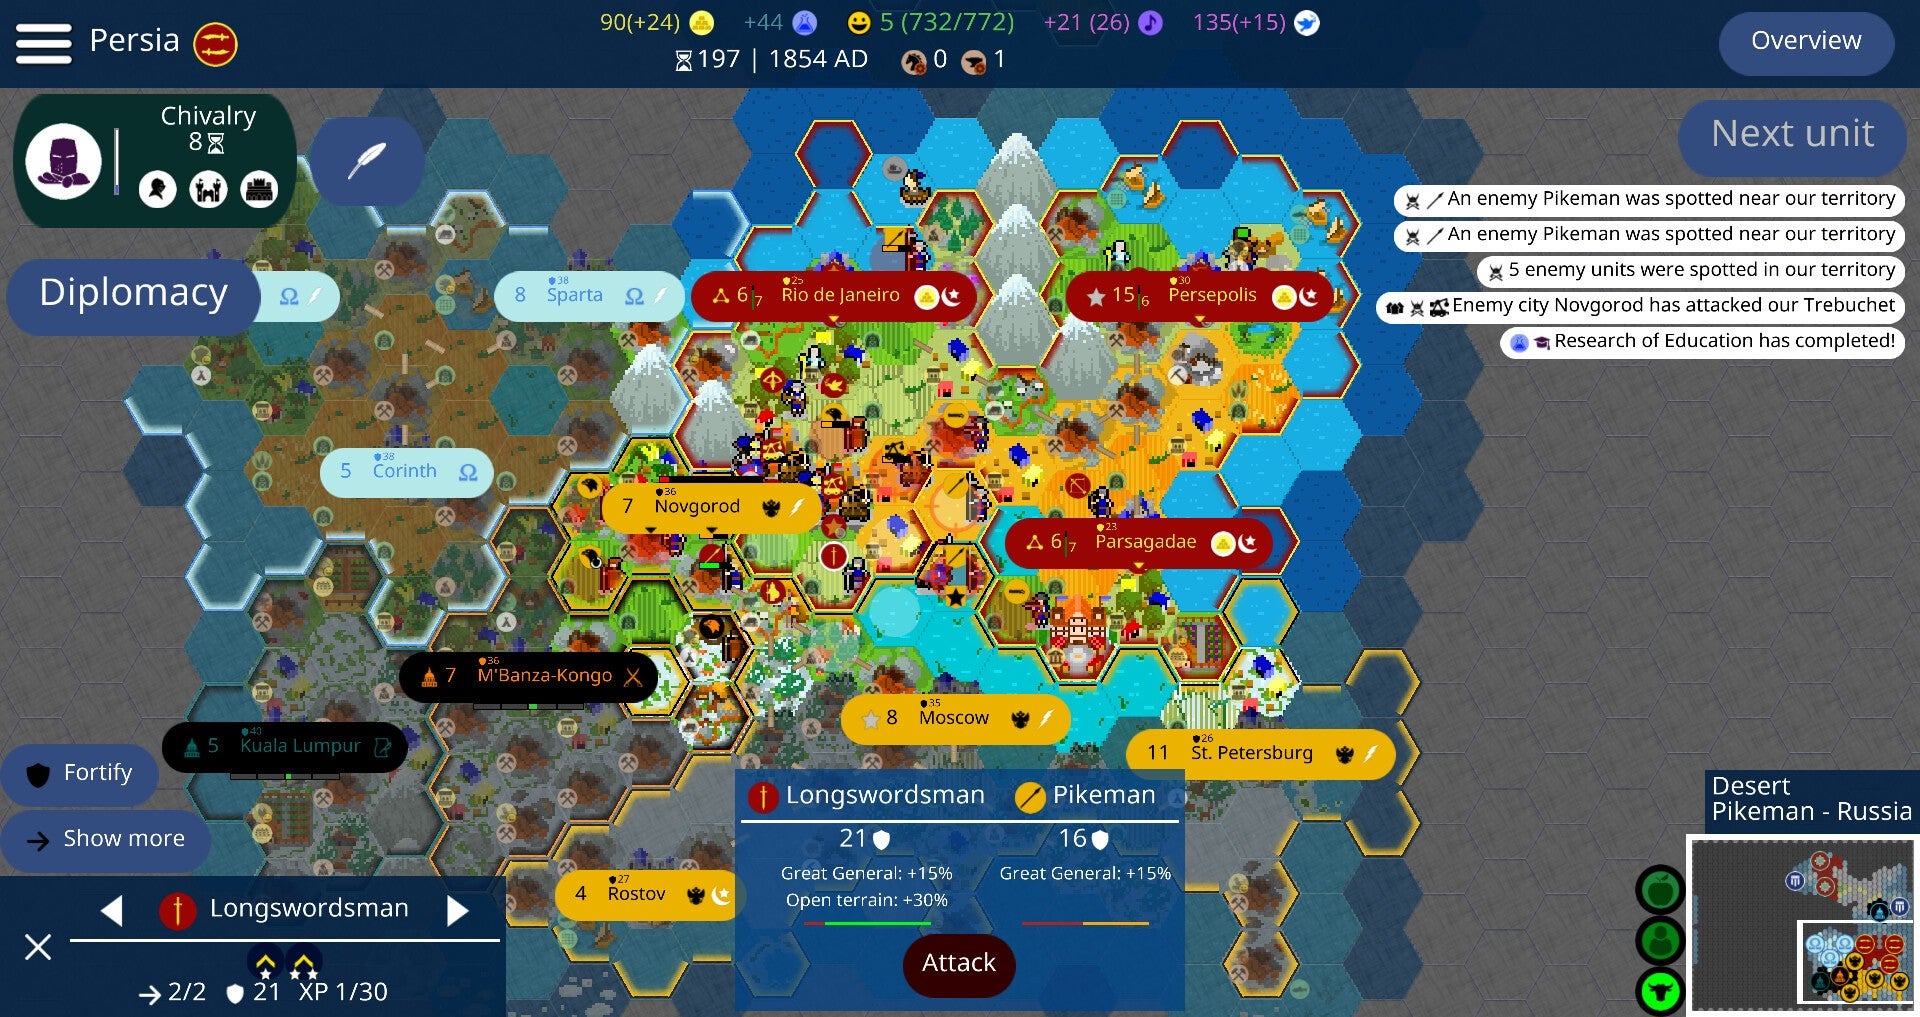 A screenshot from open-source 4X strategy game Unciv showing a battle taking place